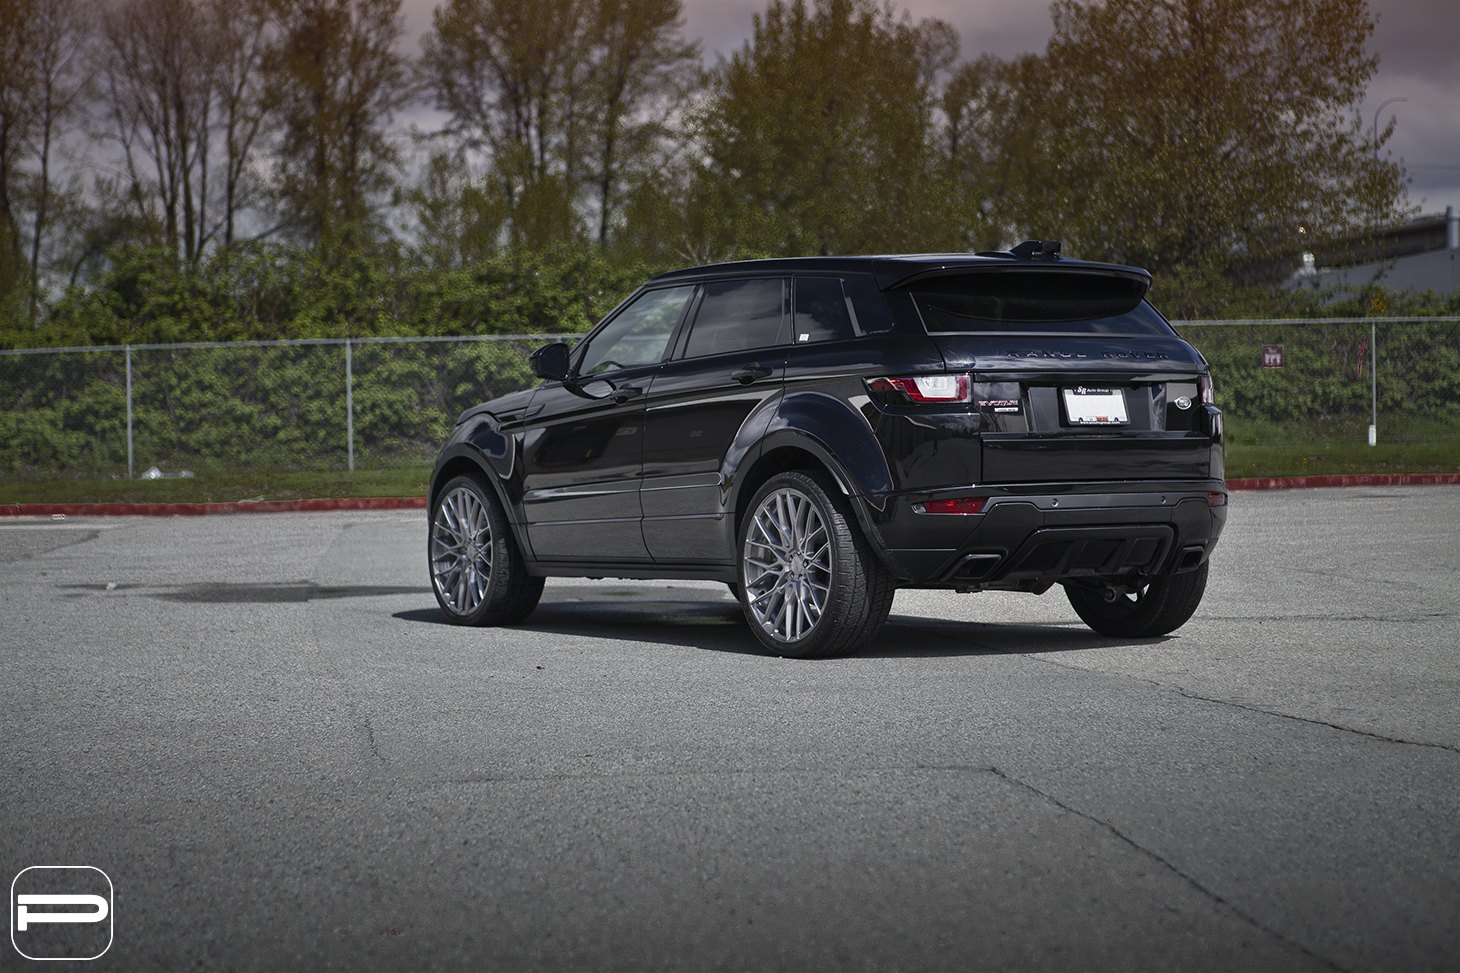 Black Range Rover Evoque with Aftermarket Rear Diffuser - Photo by PUR Wheels